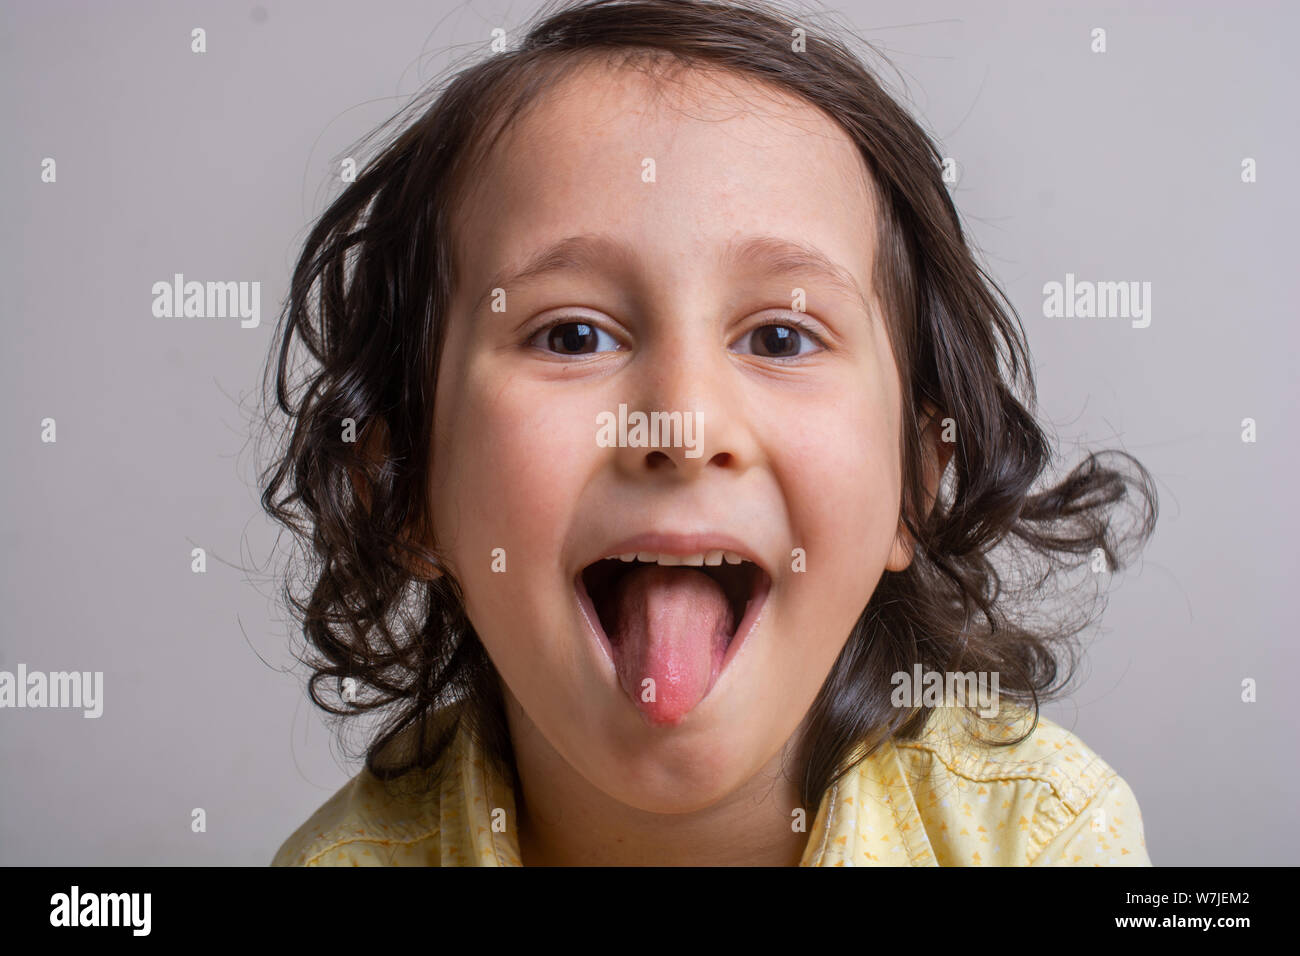 Closeup portrait of alittle boy sticking his tongue out Stock Photo